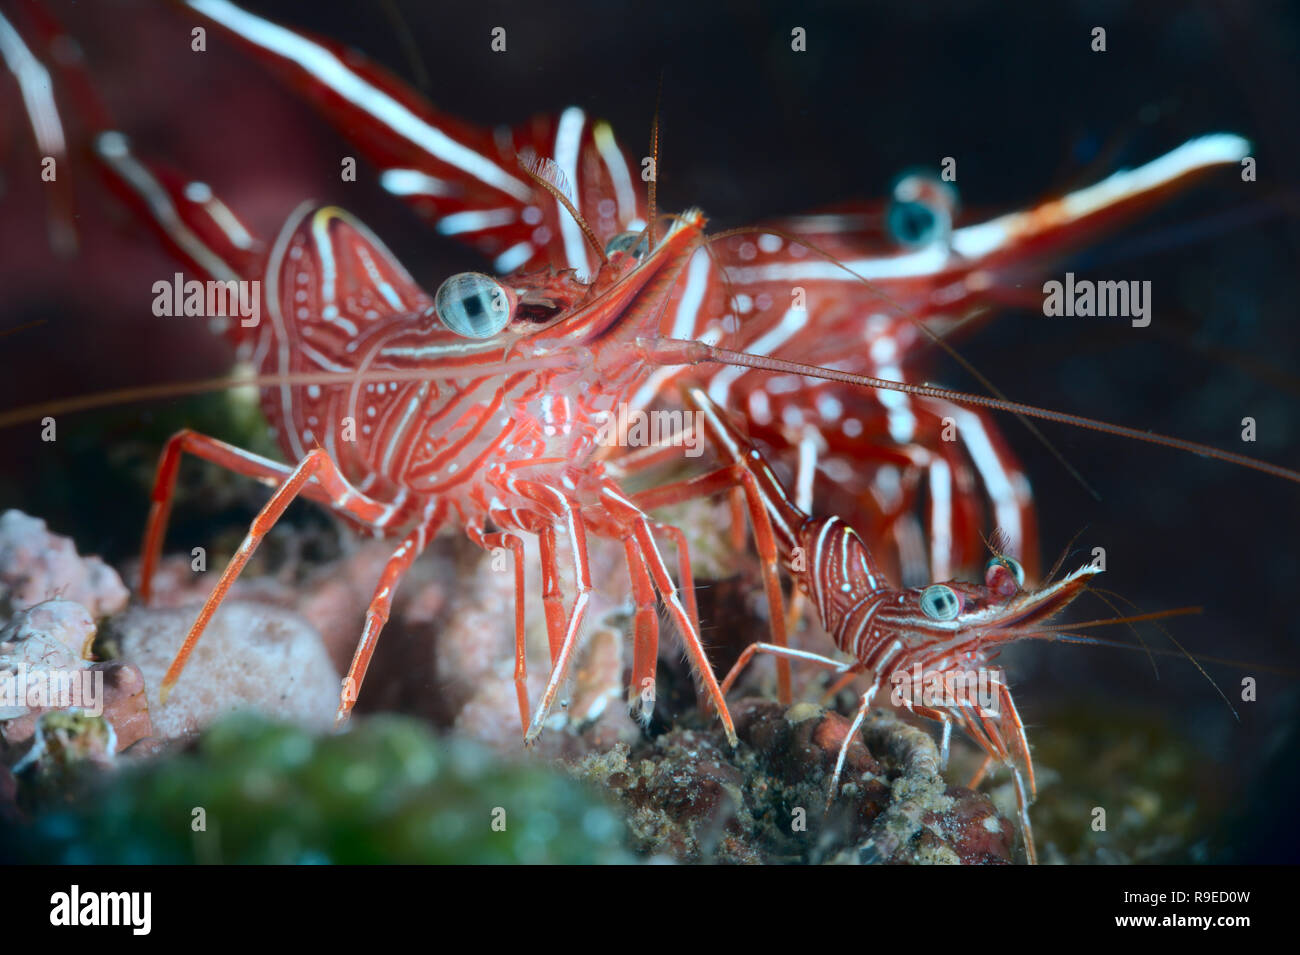 Cleaning shrimps Stock Photo